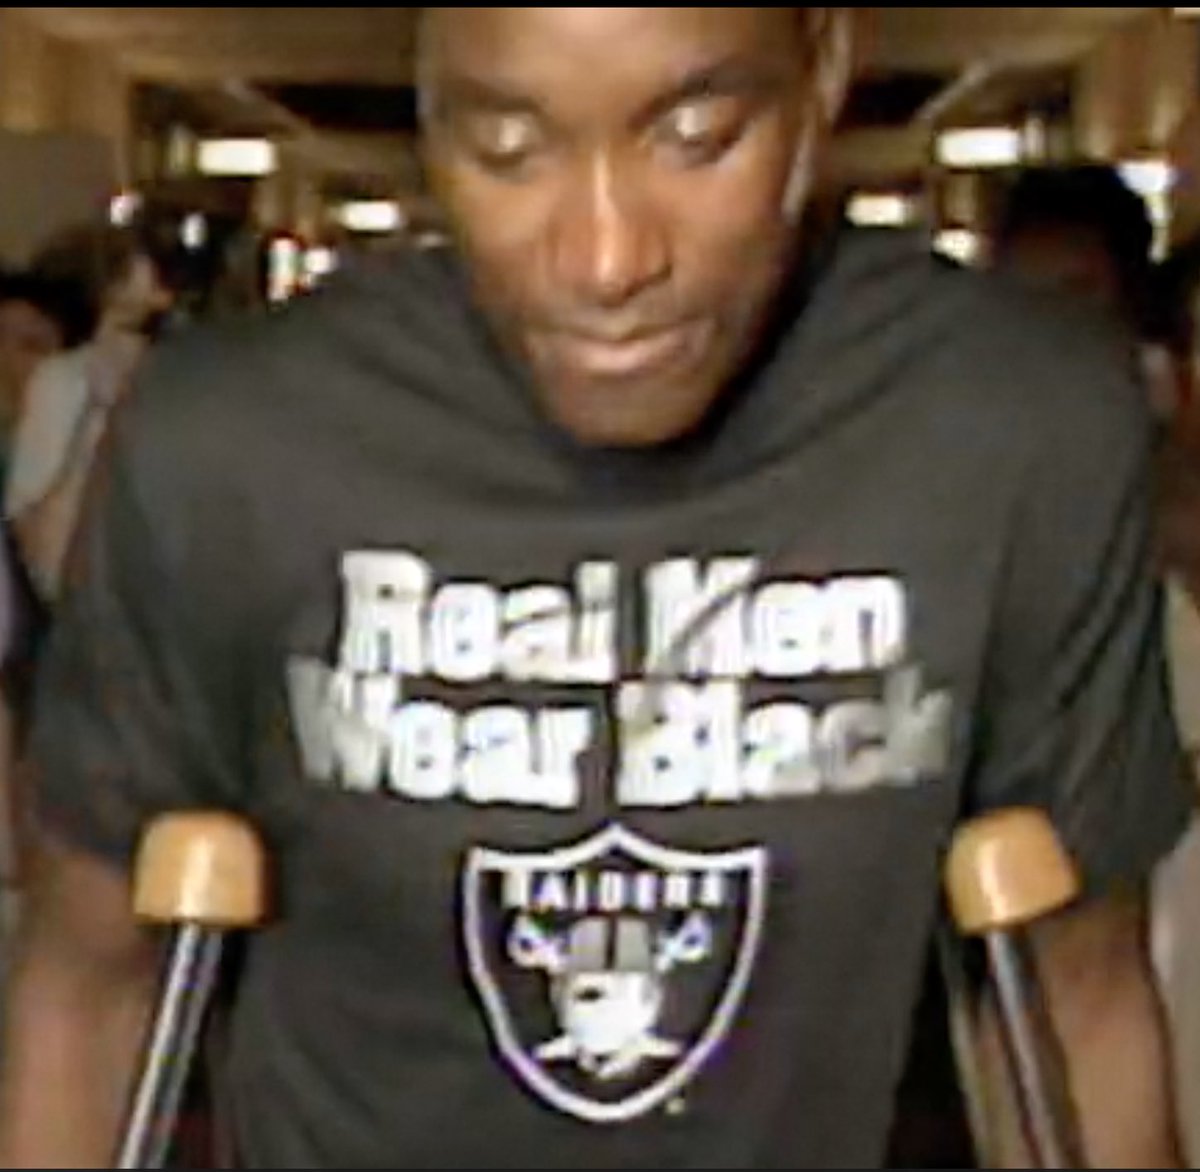 In the late 80s when Isiah Thomas and the Bad Boys Pistons came on the scene. They also embraced that role as villains in the NBA. Davis had Raiders gear sent out to Pistons players, who wore caps and shirts during practice and pre-game warmups. Fans quickly took notice.